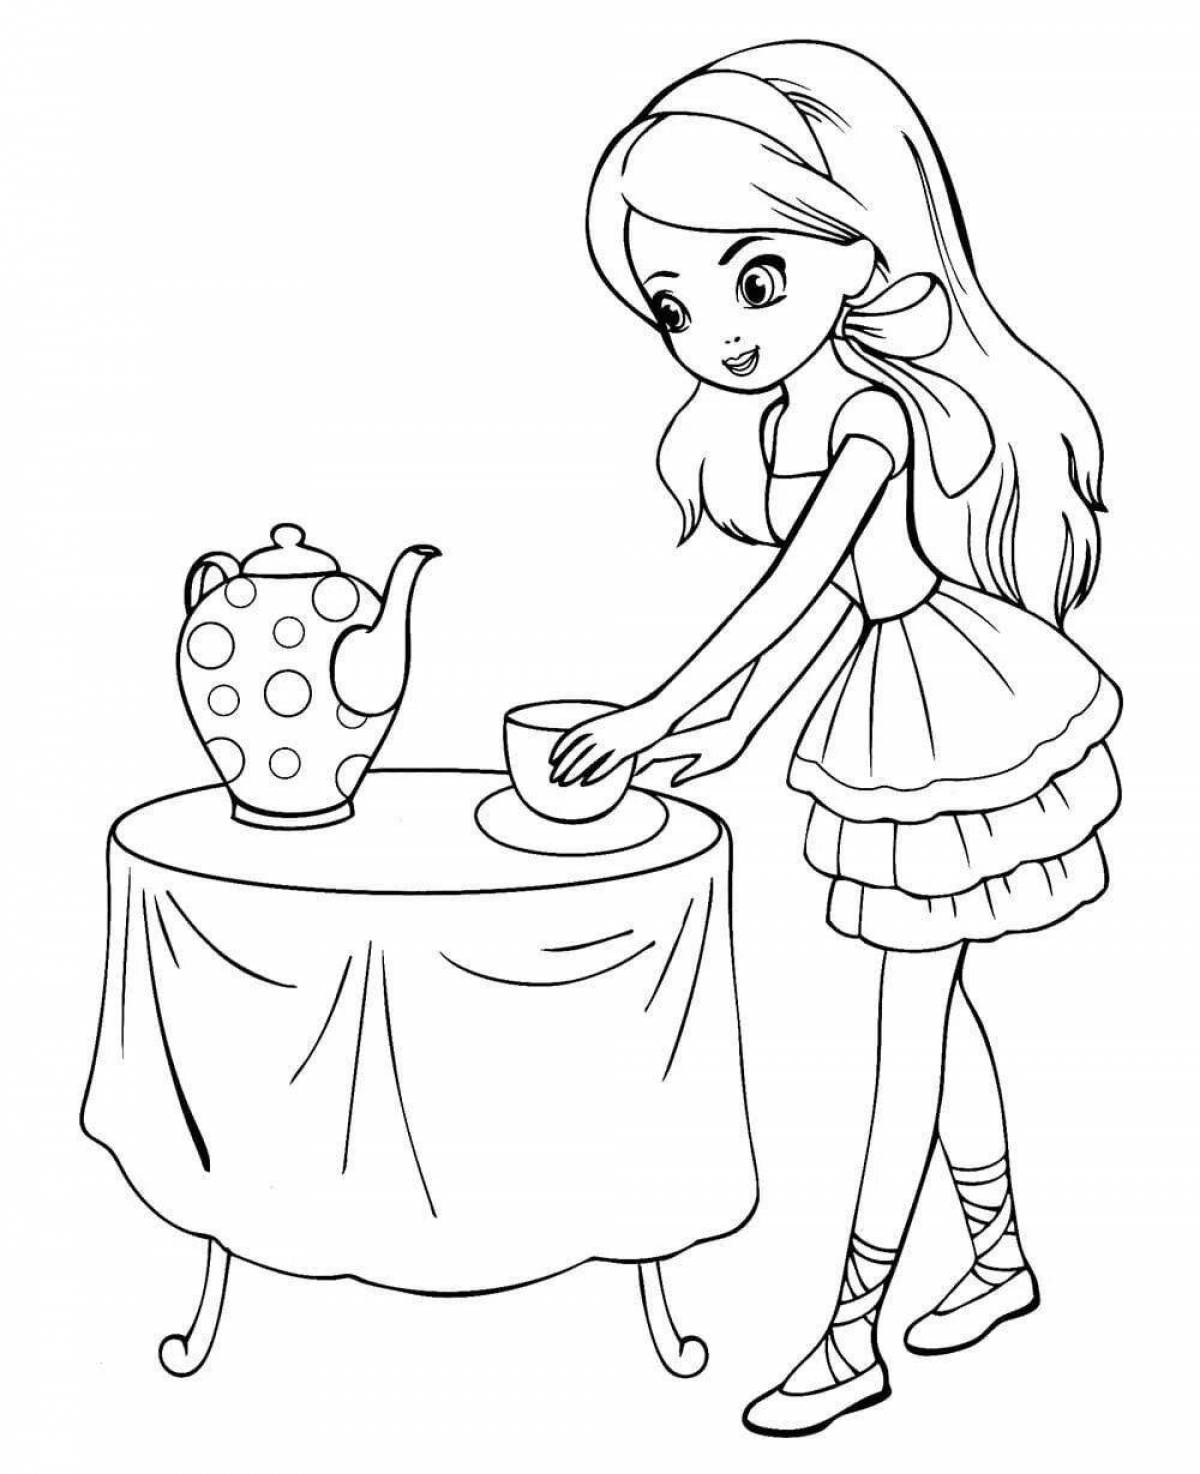 Adorable coloring book for girls 5-7 years old